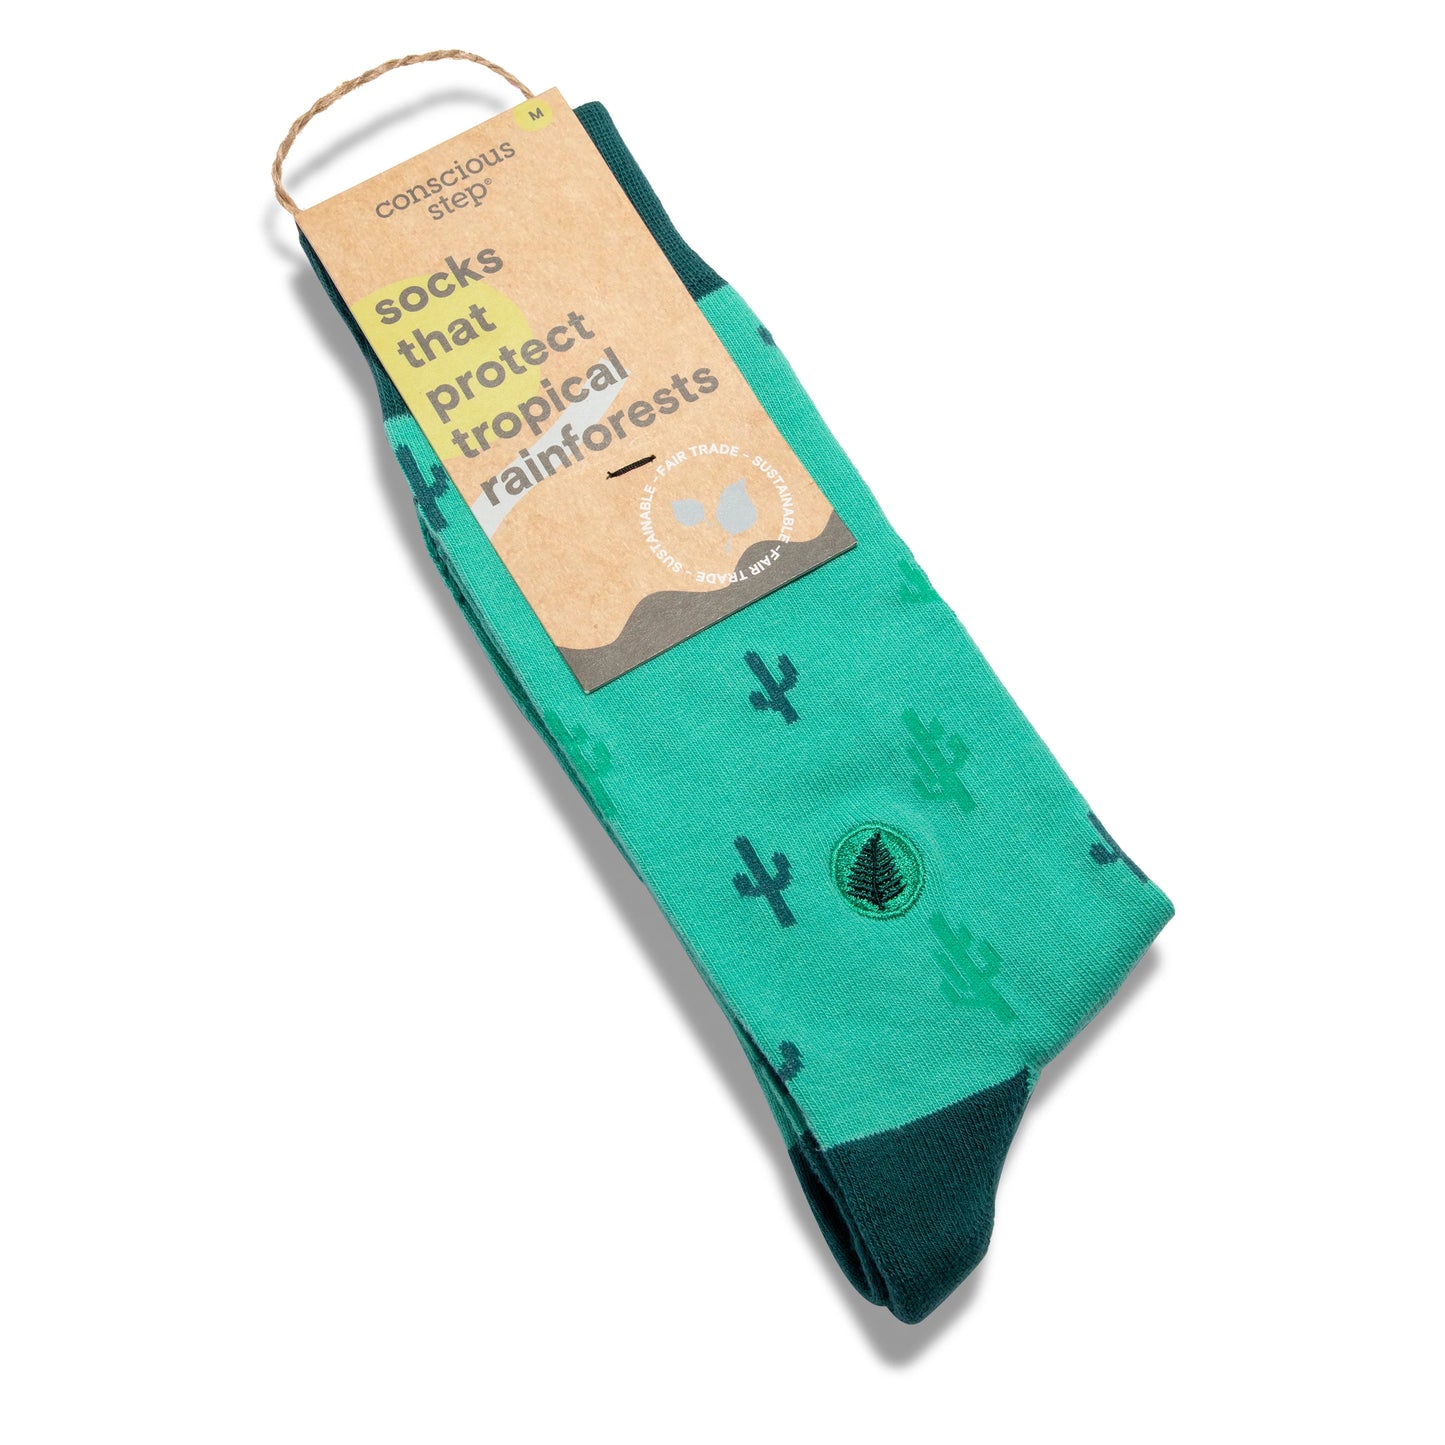 Socks that Support Conservation International - Cactus pattern